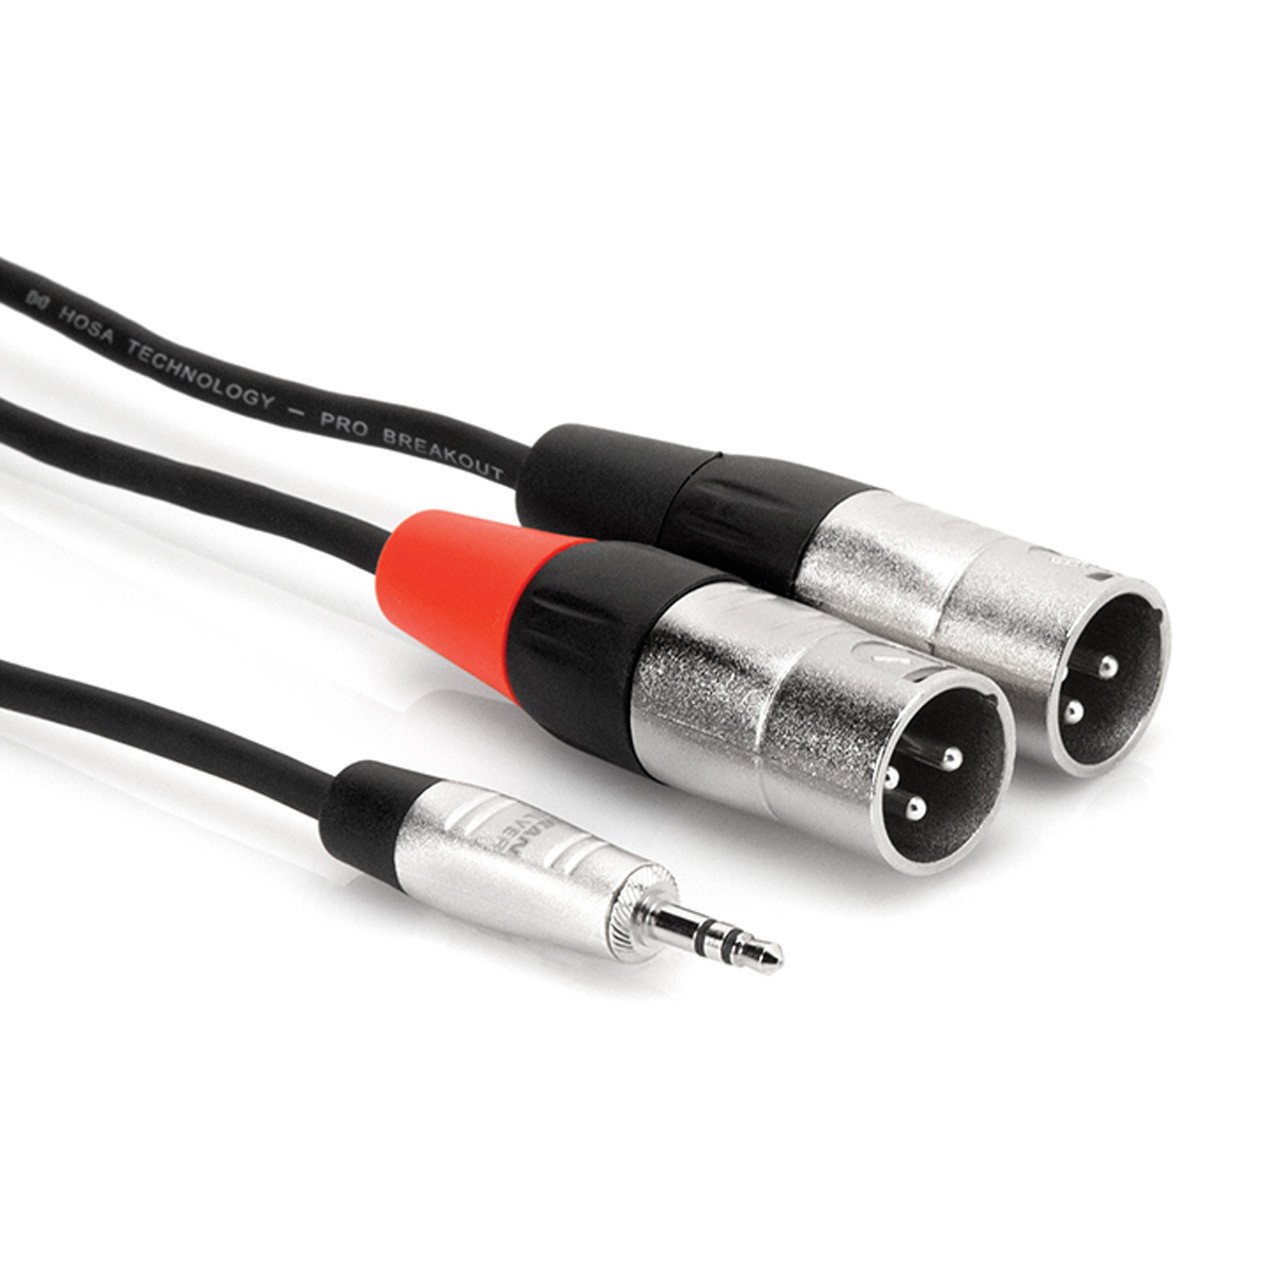 Cables & Adapters - Hosa HMX Pro Series Stereo Breakout 3.5mm TRS To Dual XLR3M